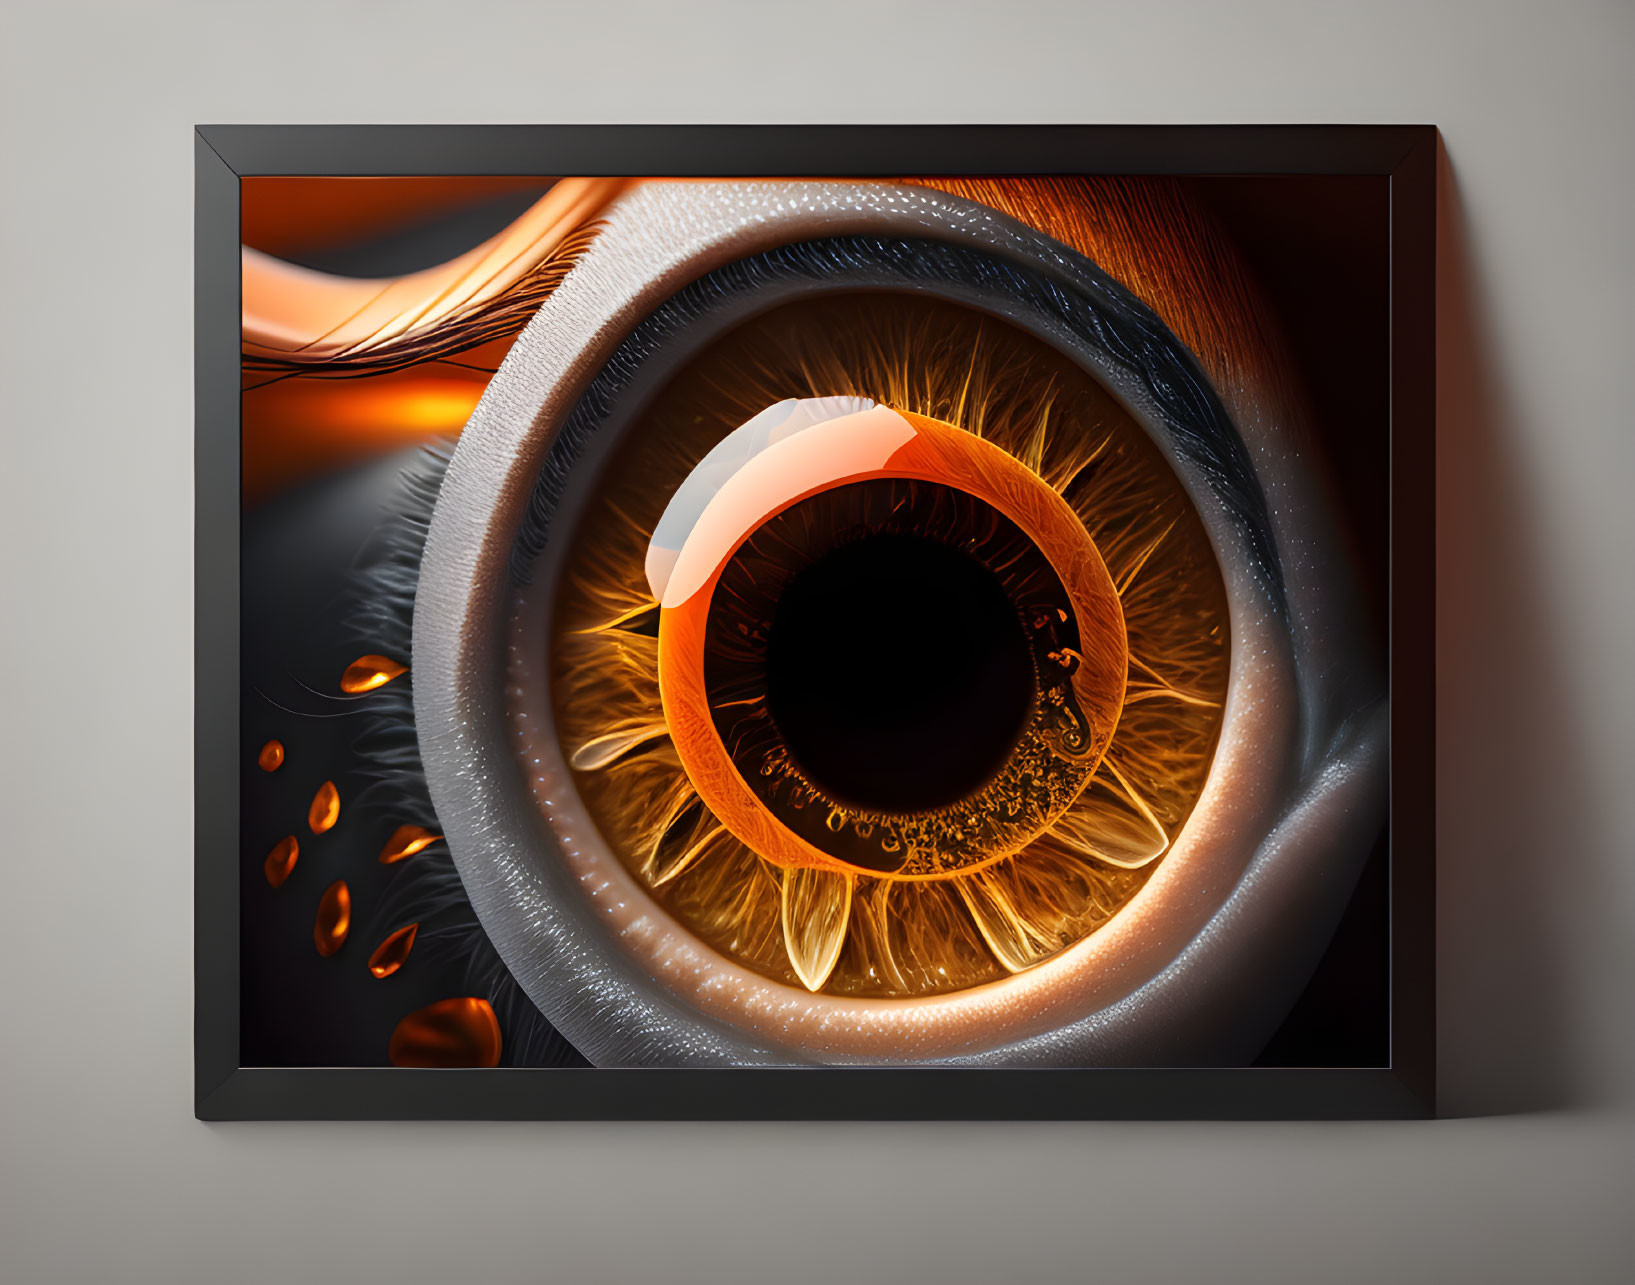 Surreal framed artwork: eye with abstract orange tones, droplets, hair-like extensions